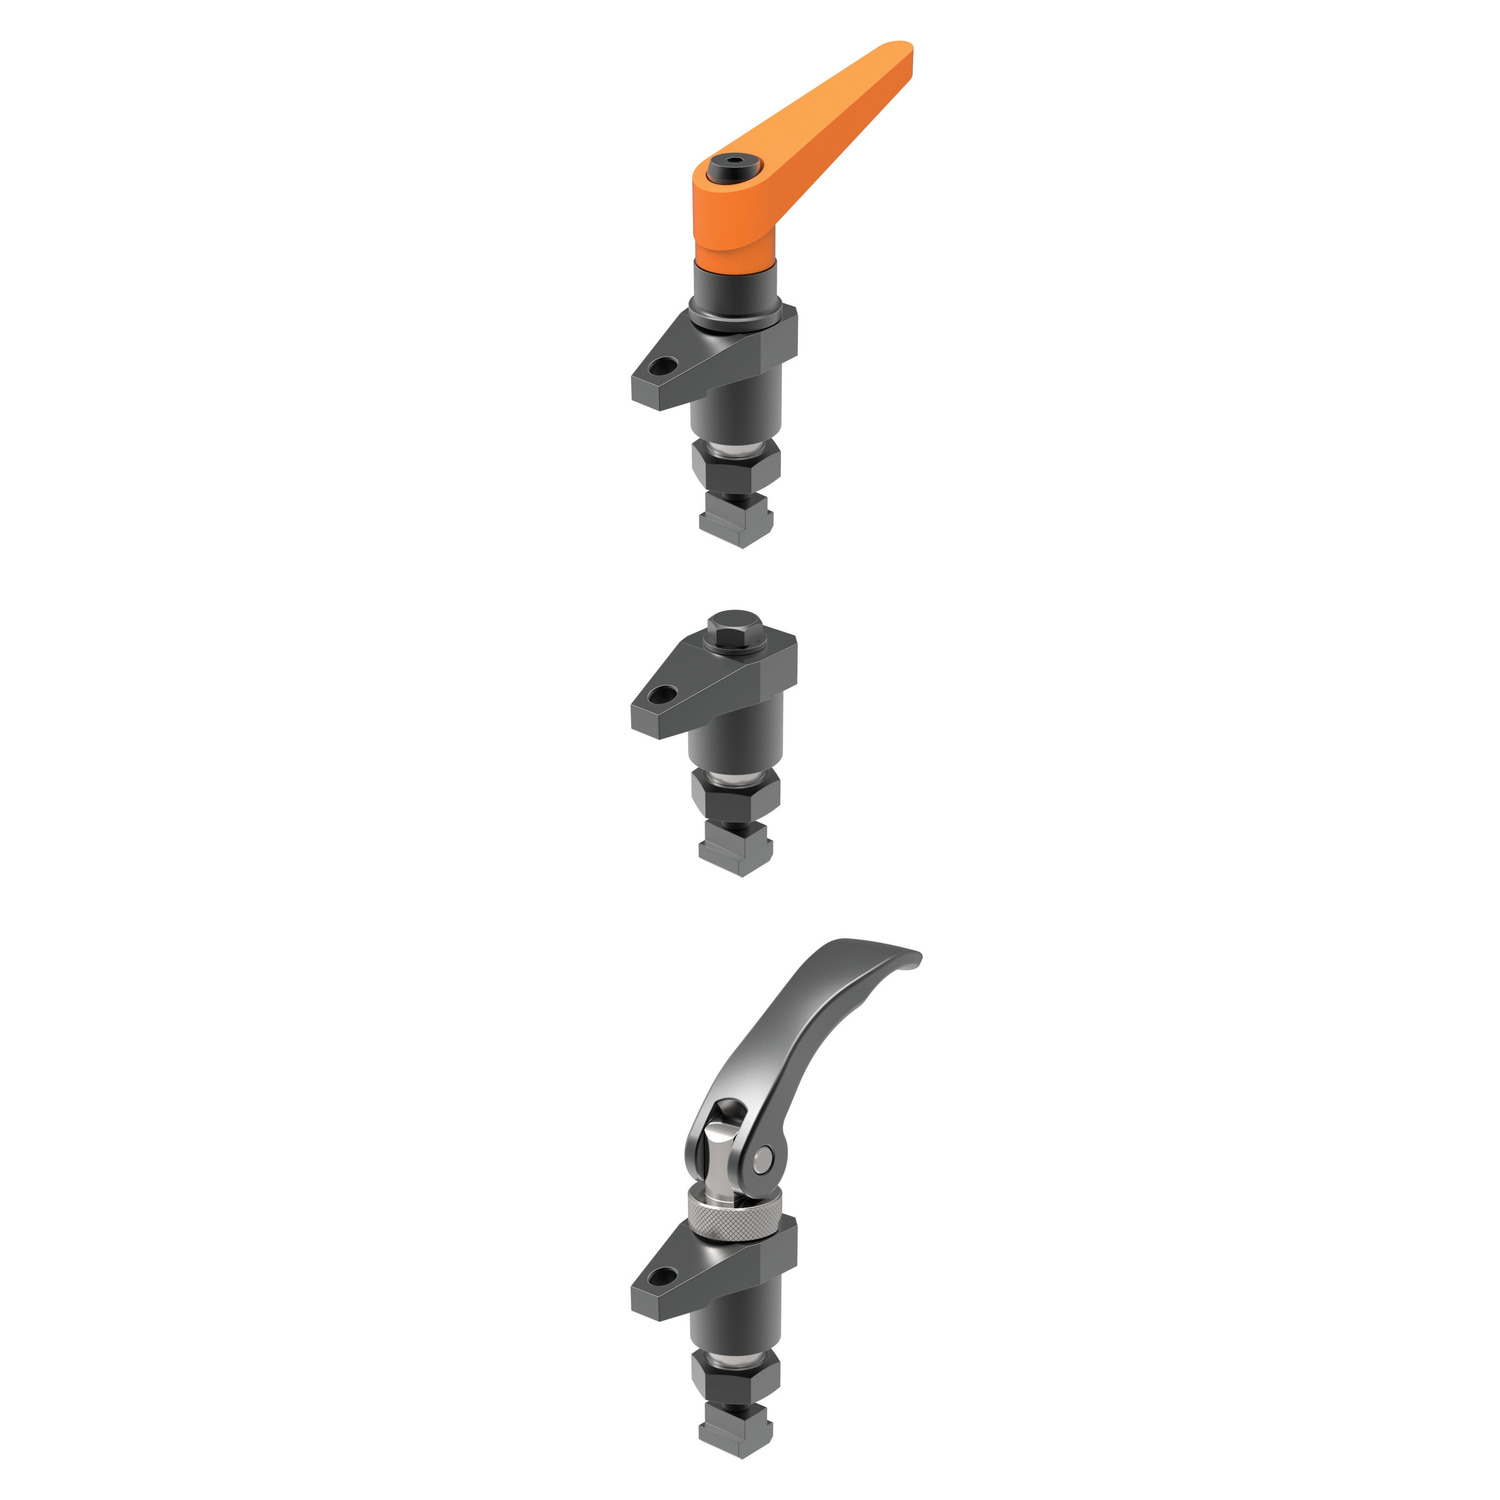 12601 - Miniature Down Thrust Clamps